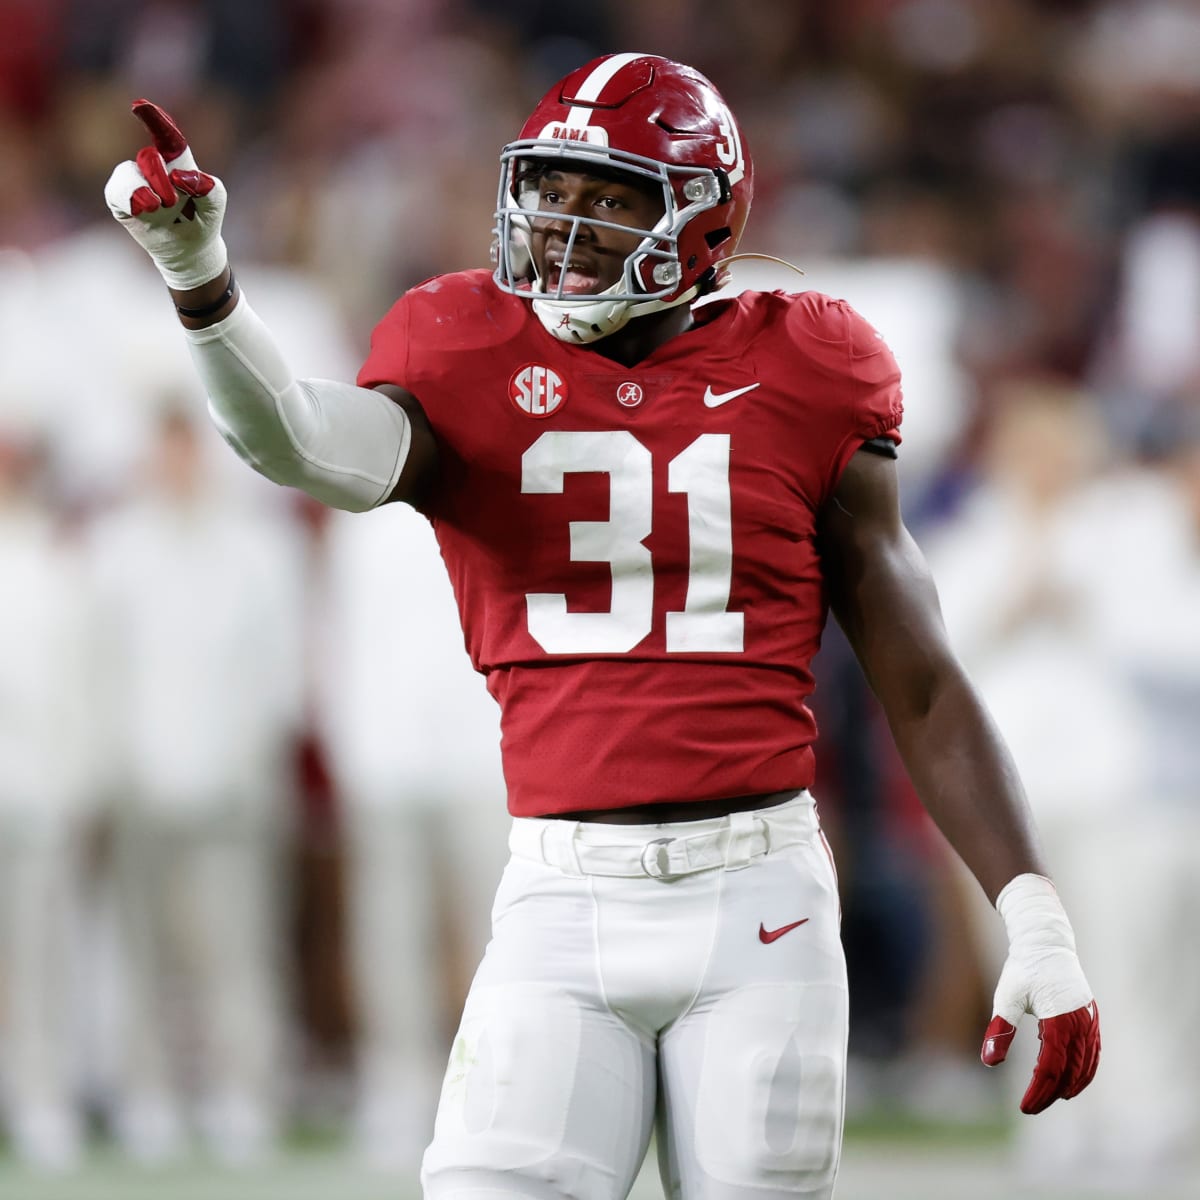 SEC Names Alabama OLB Will Anderson Jr. Defensive Player of the